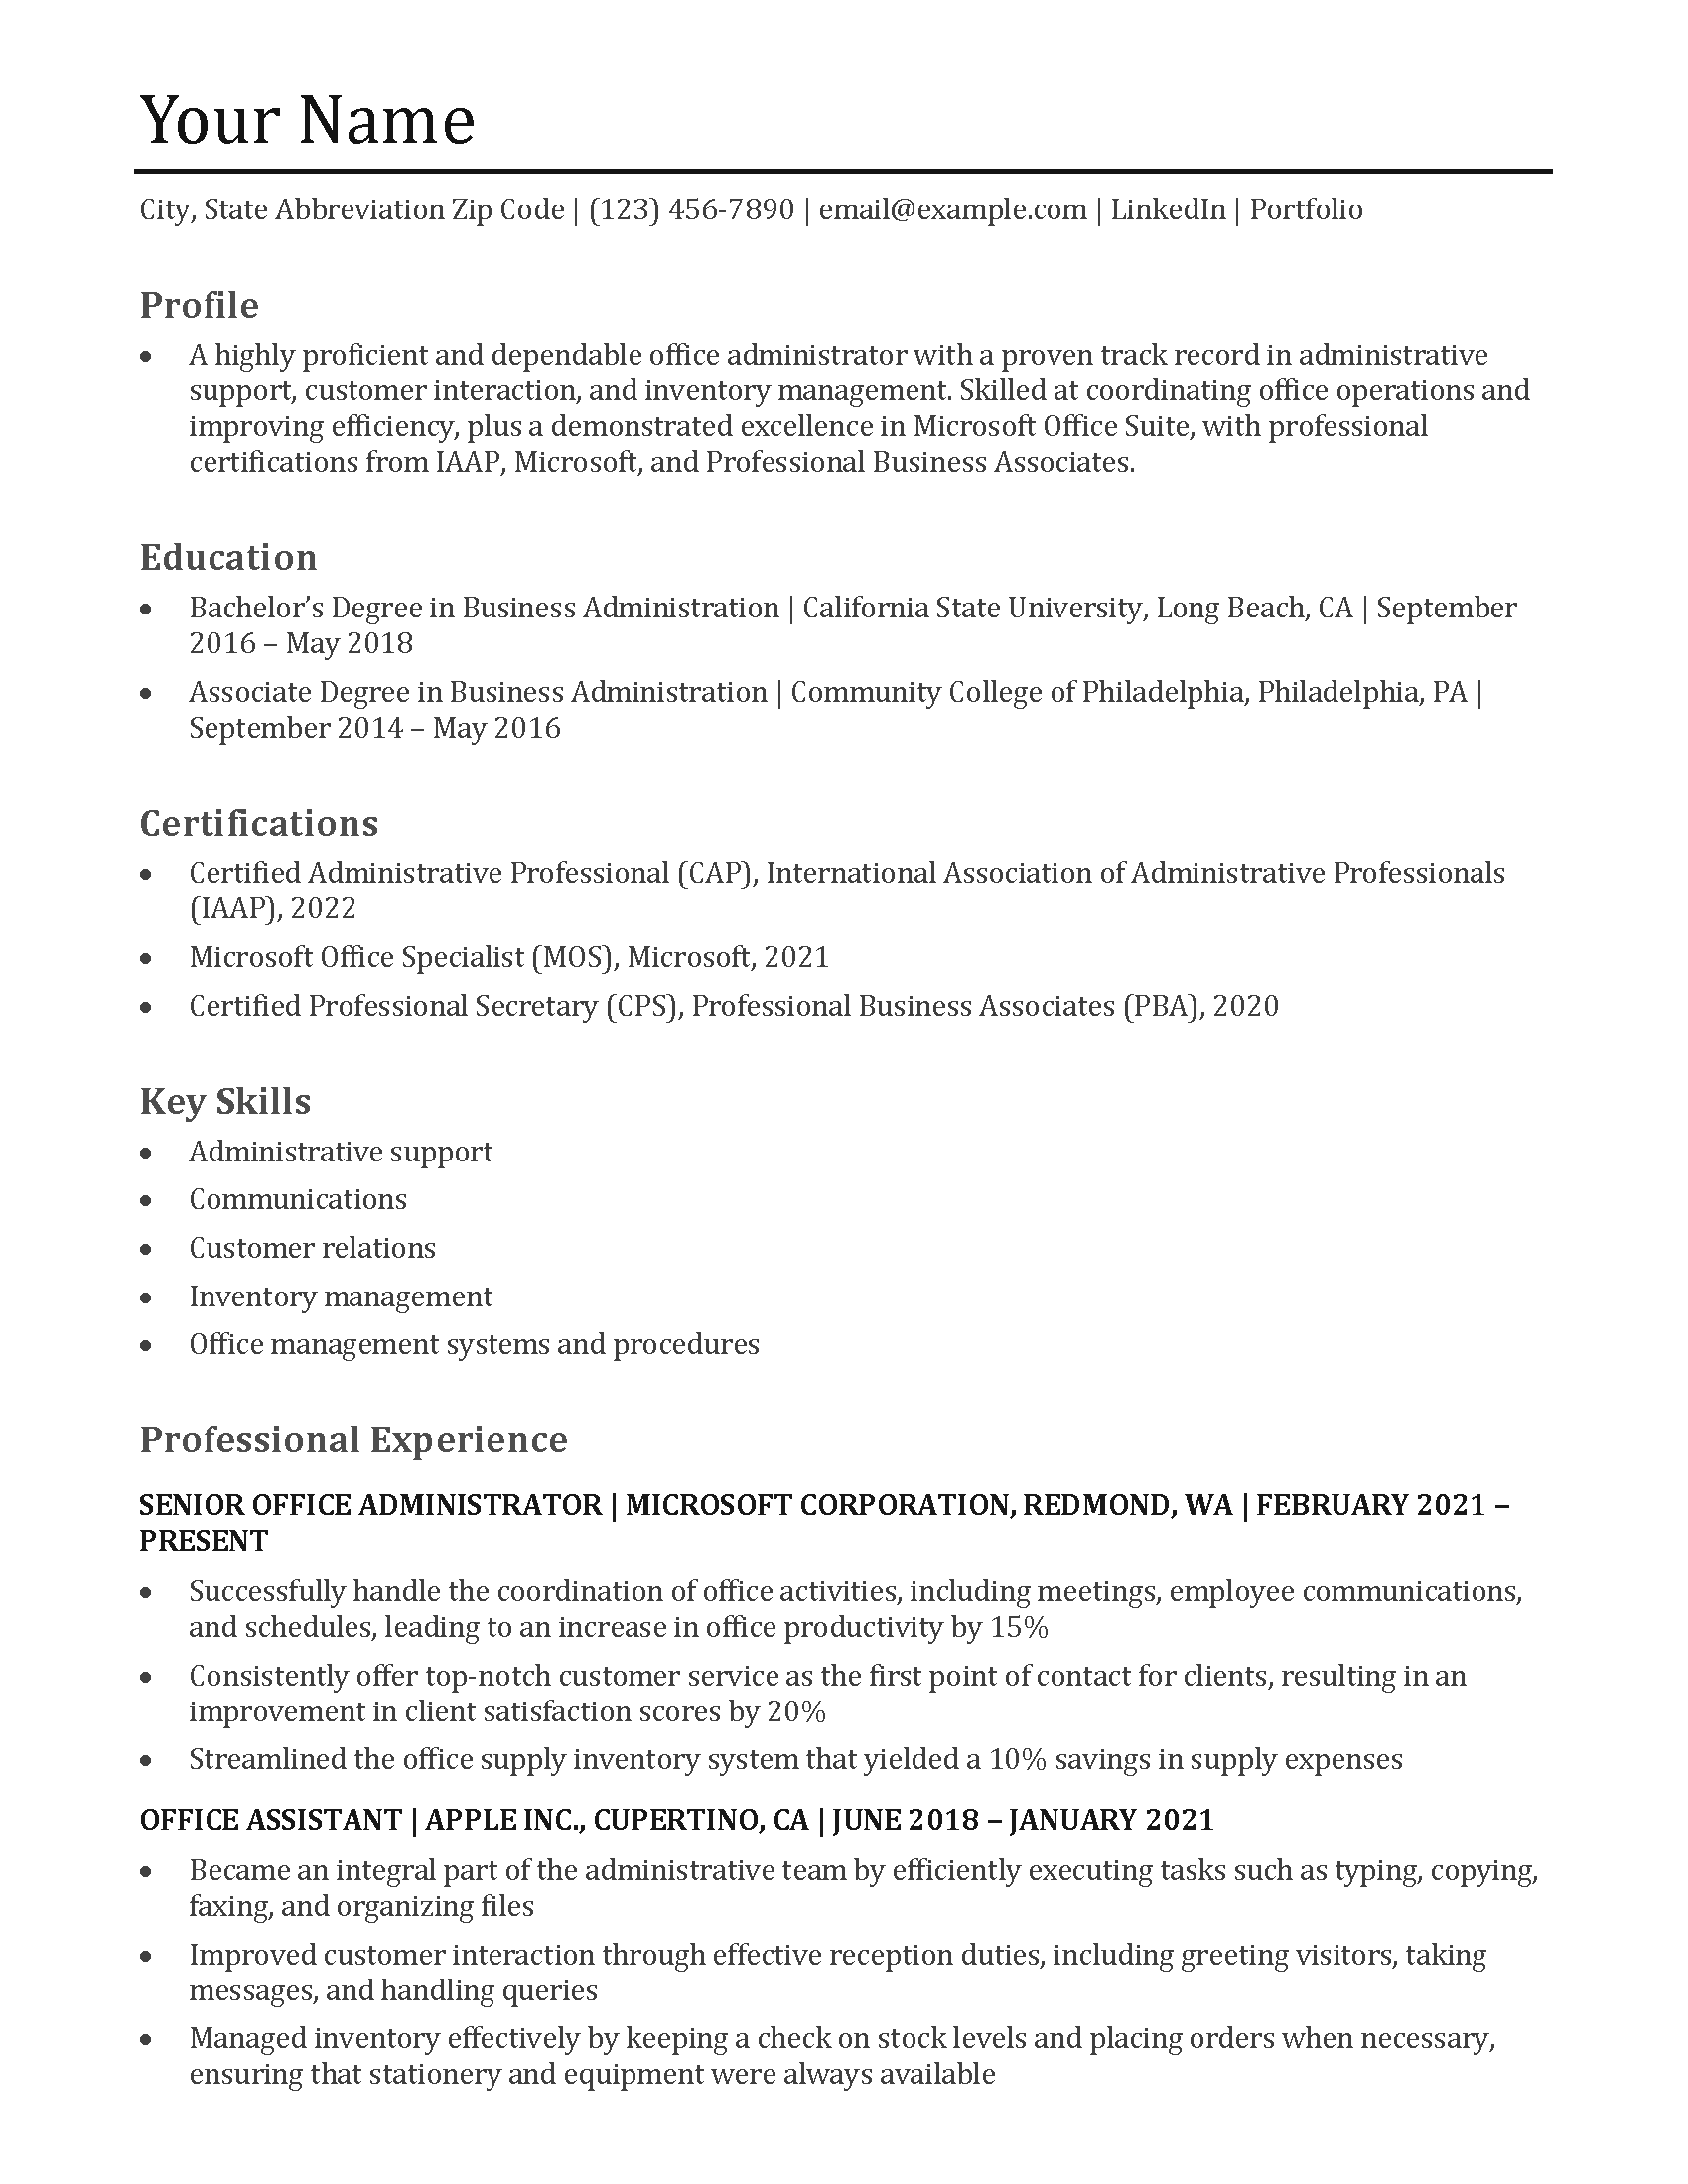 Office Assistant Resume Templates and Examples